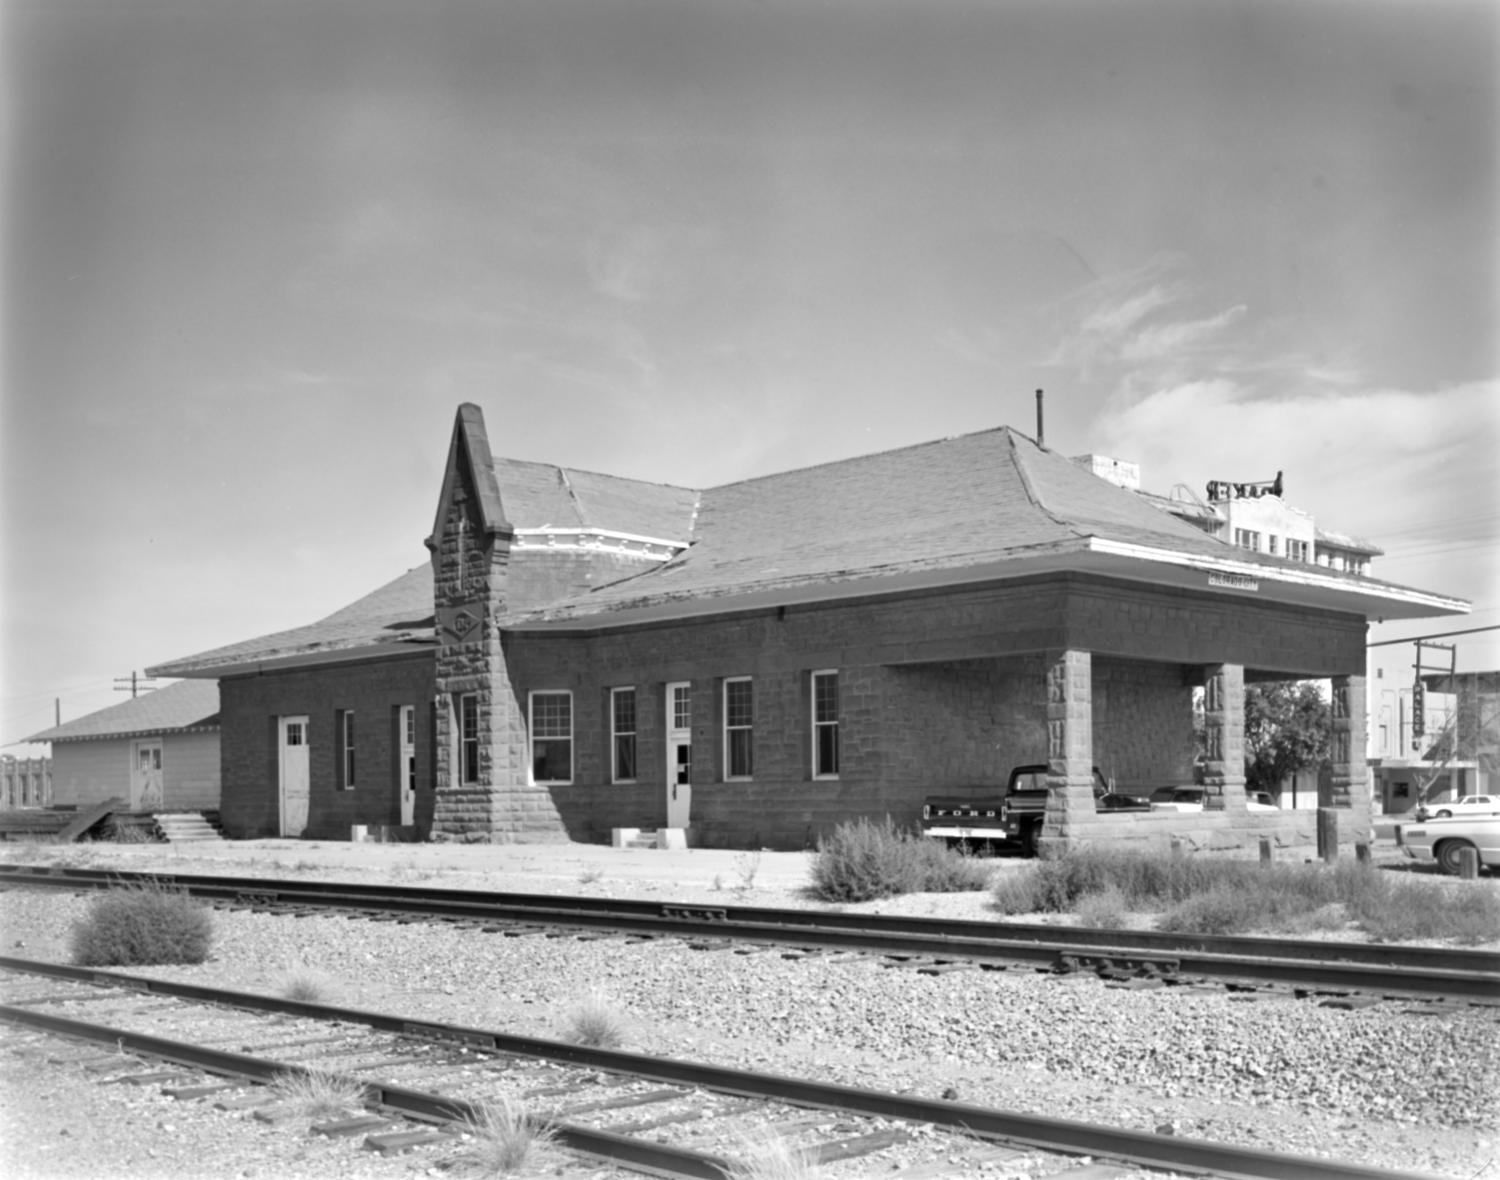 Images of Texas & Pacific Stations and Structures in  Colorado City, TX